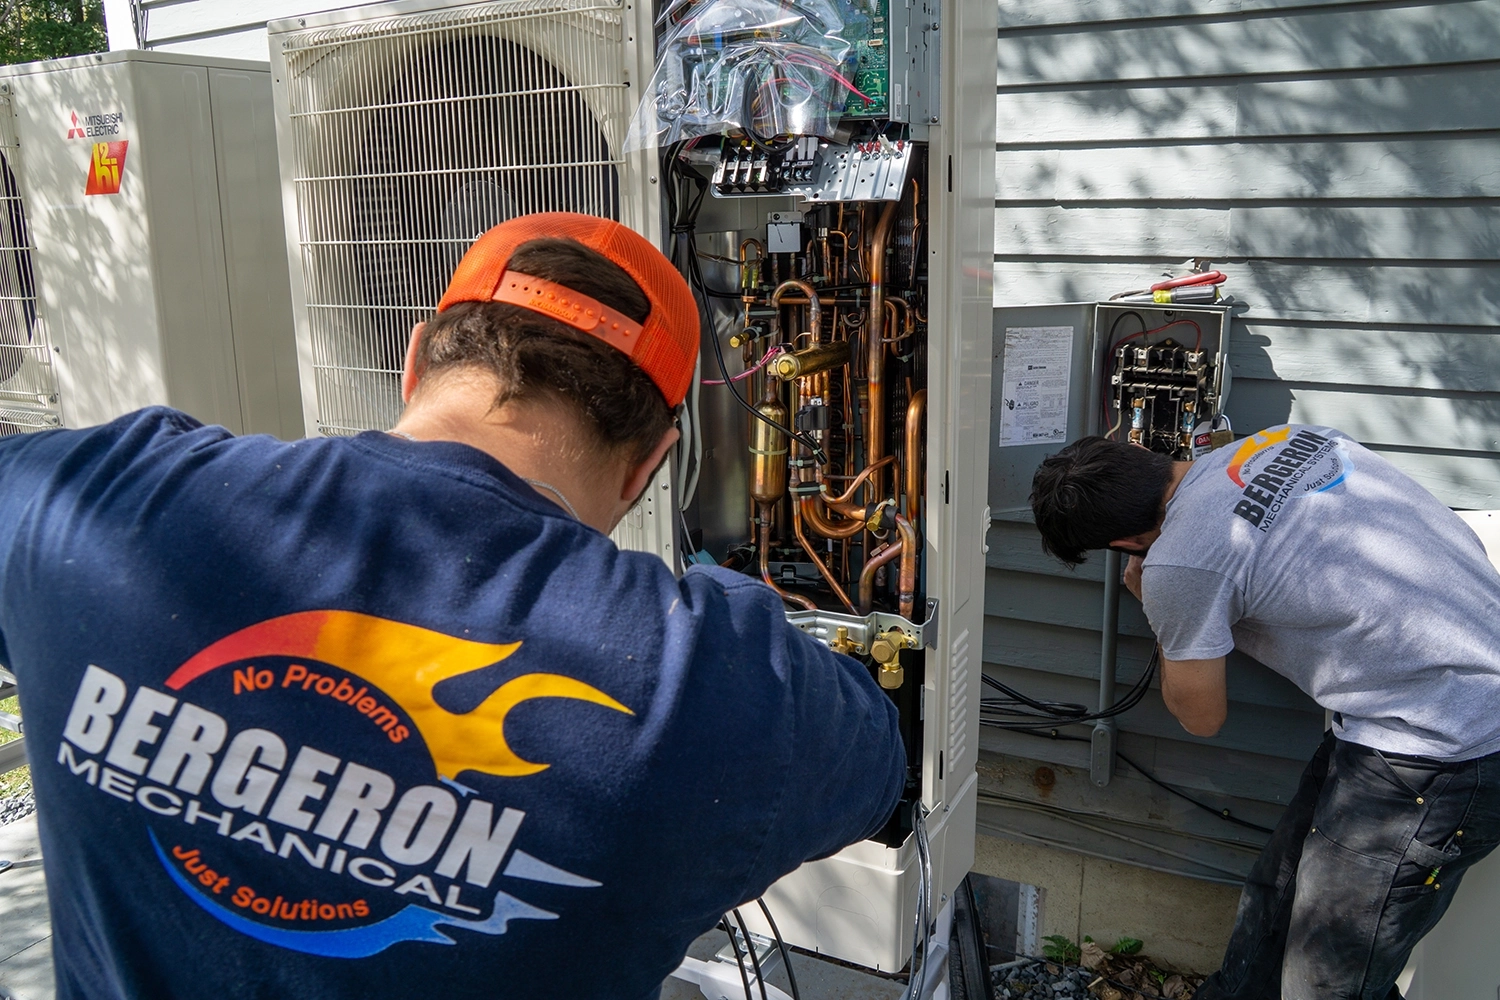 Air conditioning replacement in Keene, NH with Bergeron Mechanical Systems.